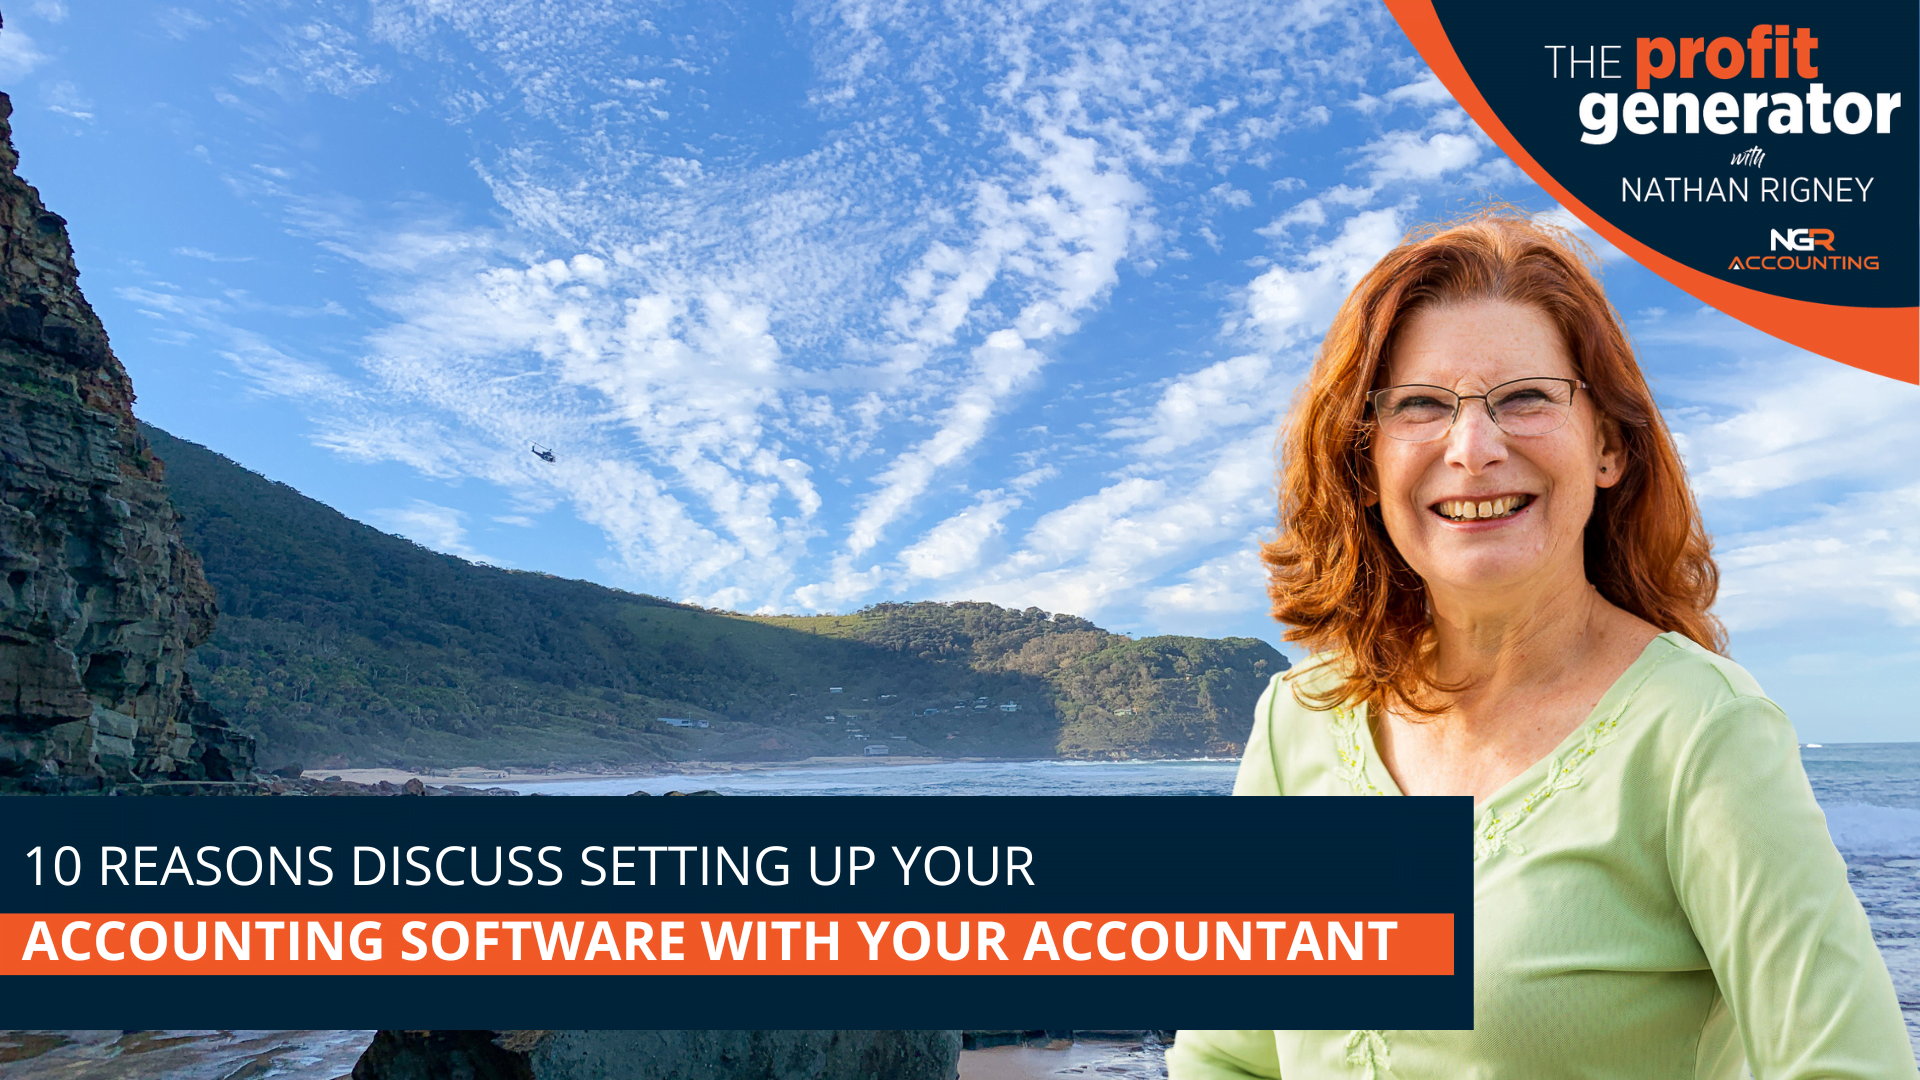 10 Reasons to Discuss Setting up your Accounting Software with your Accountant